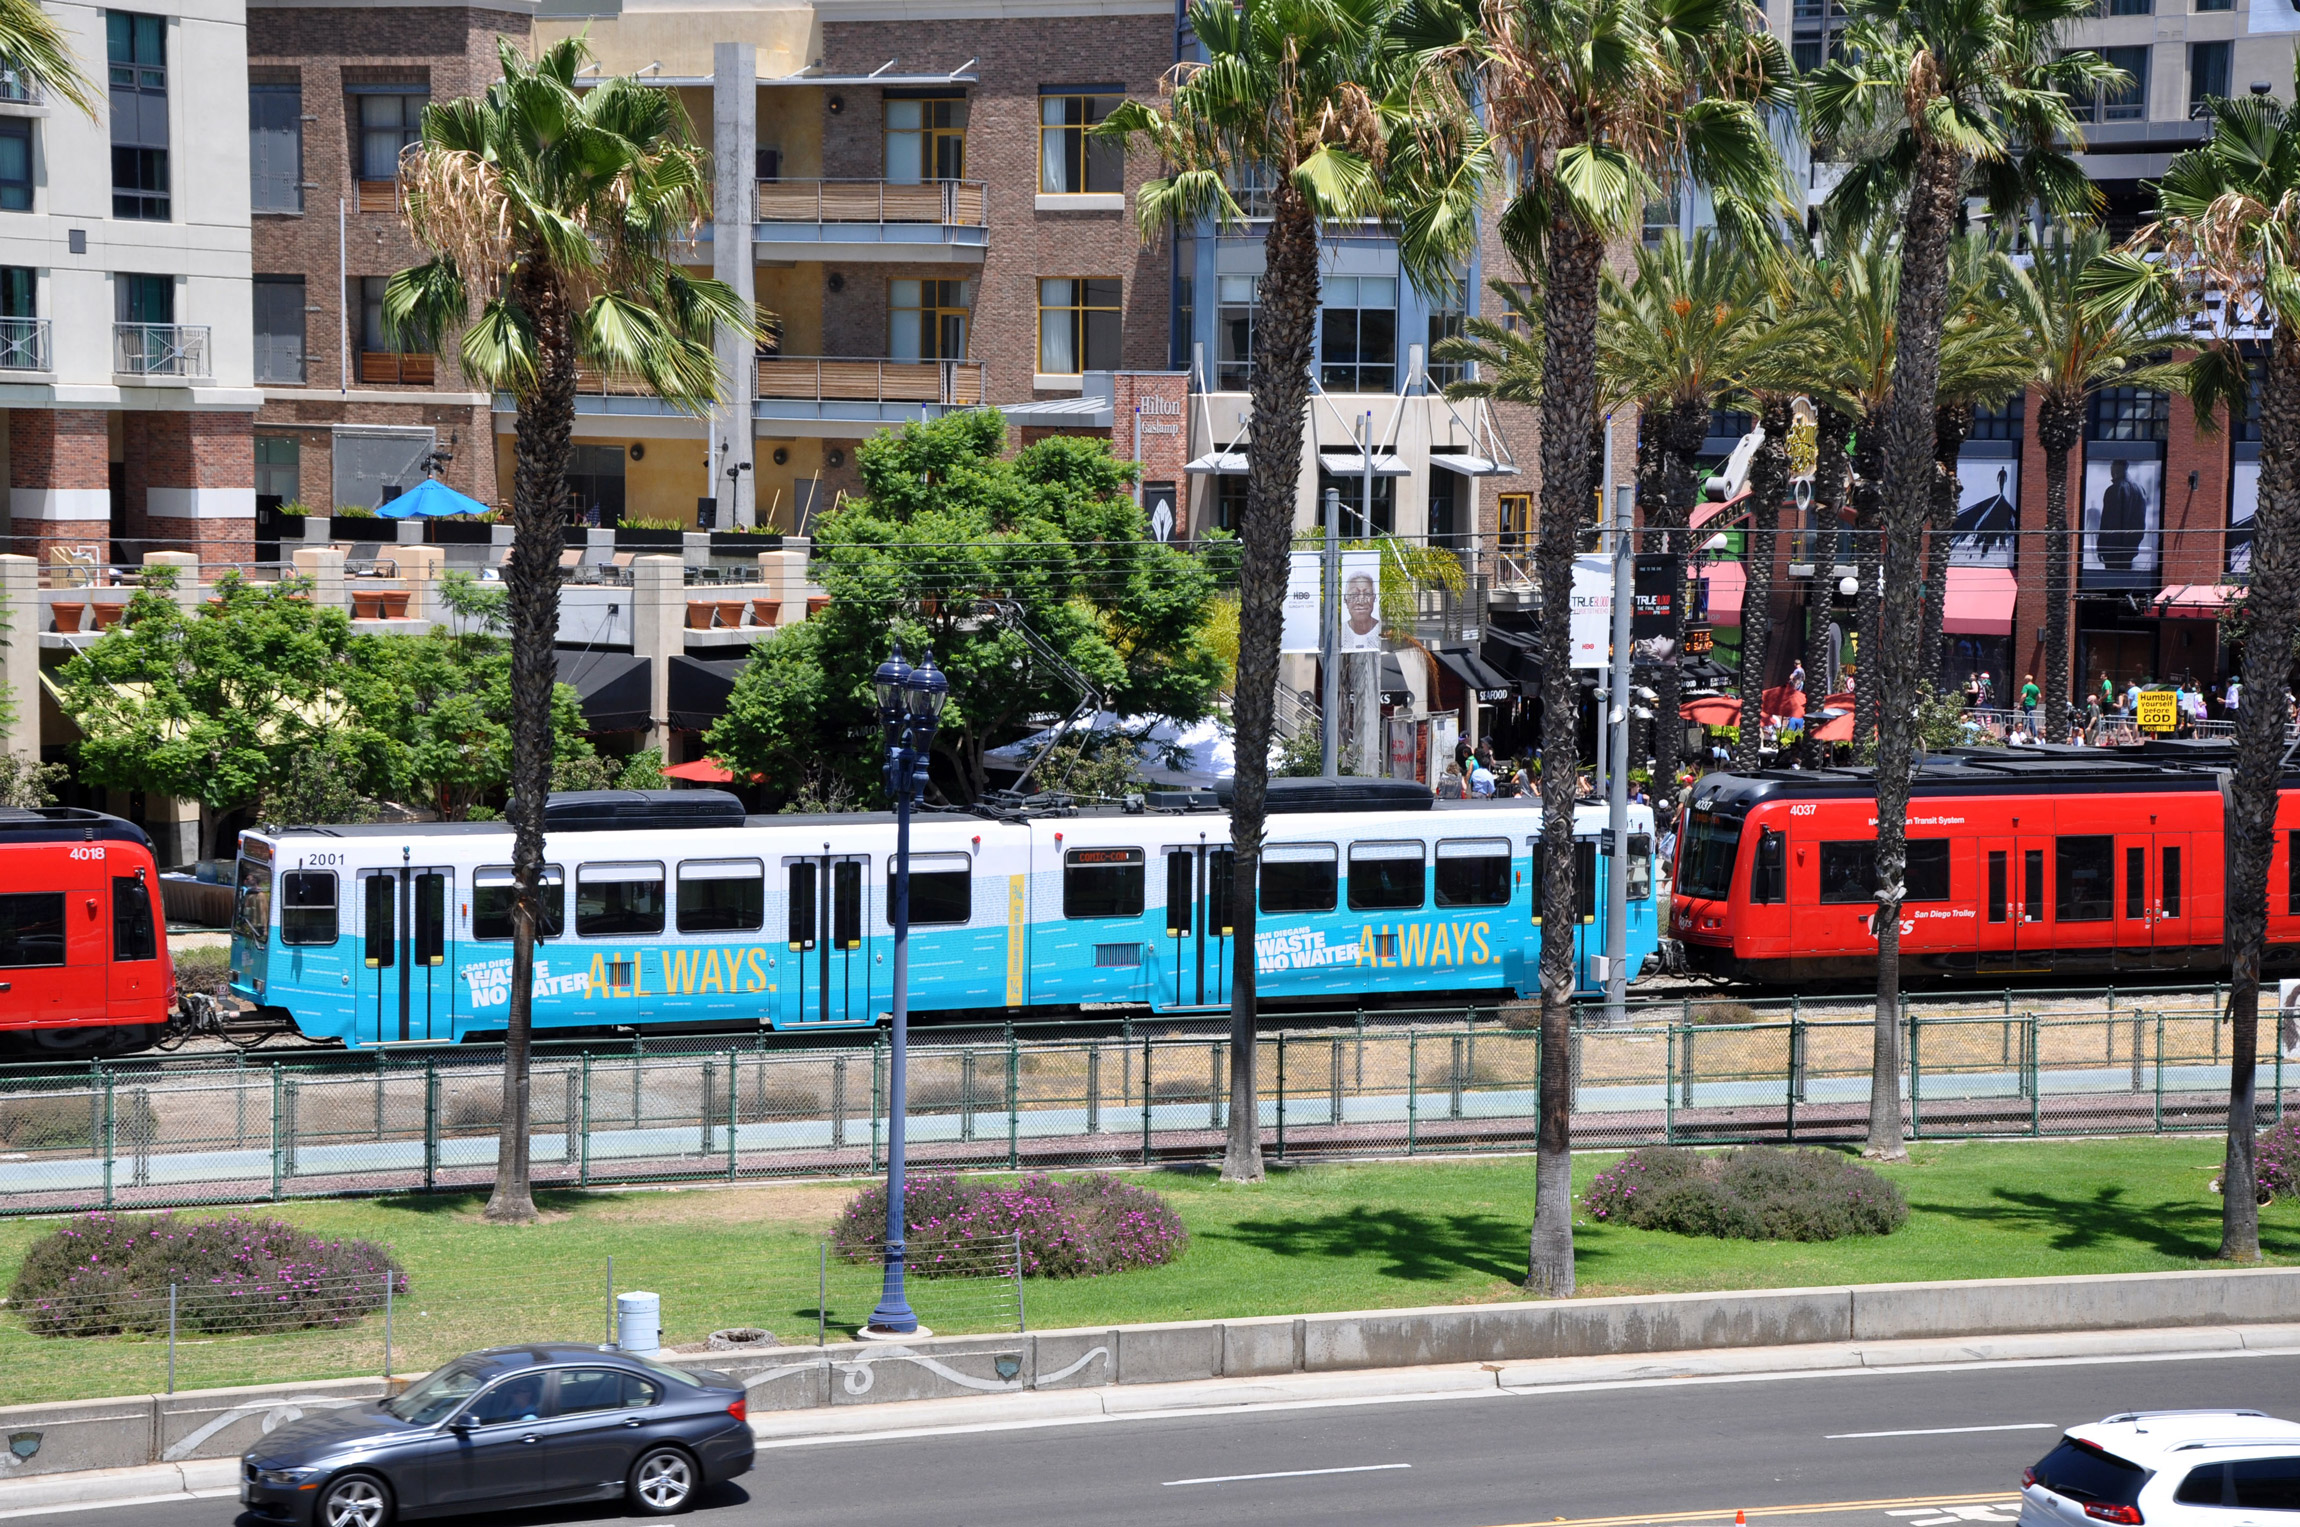 A trolley car wrapped in campaign graphics passes through downtown San Diego